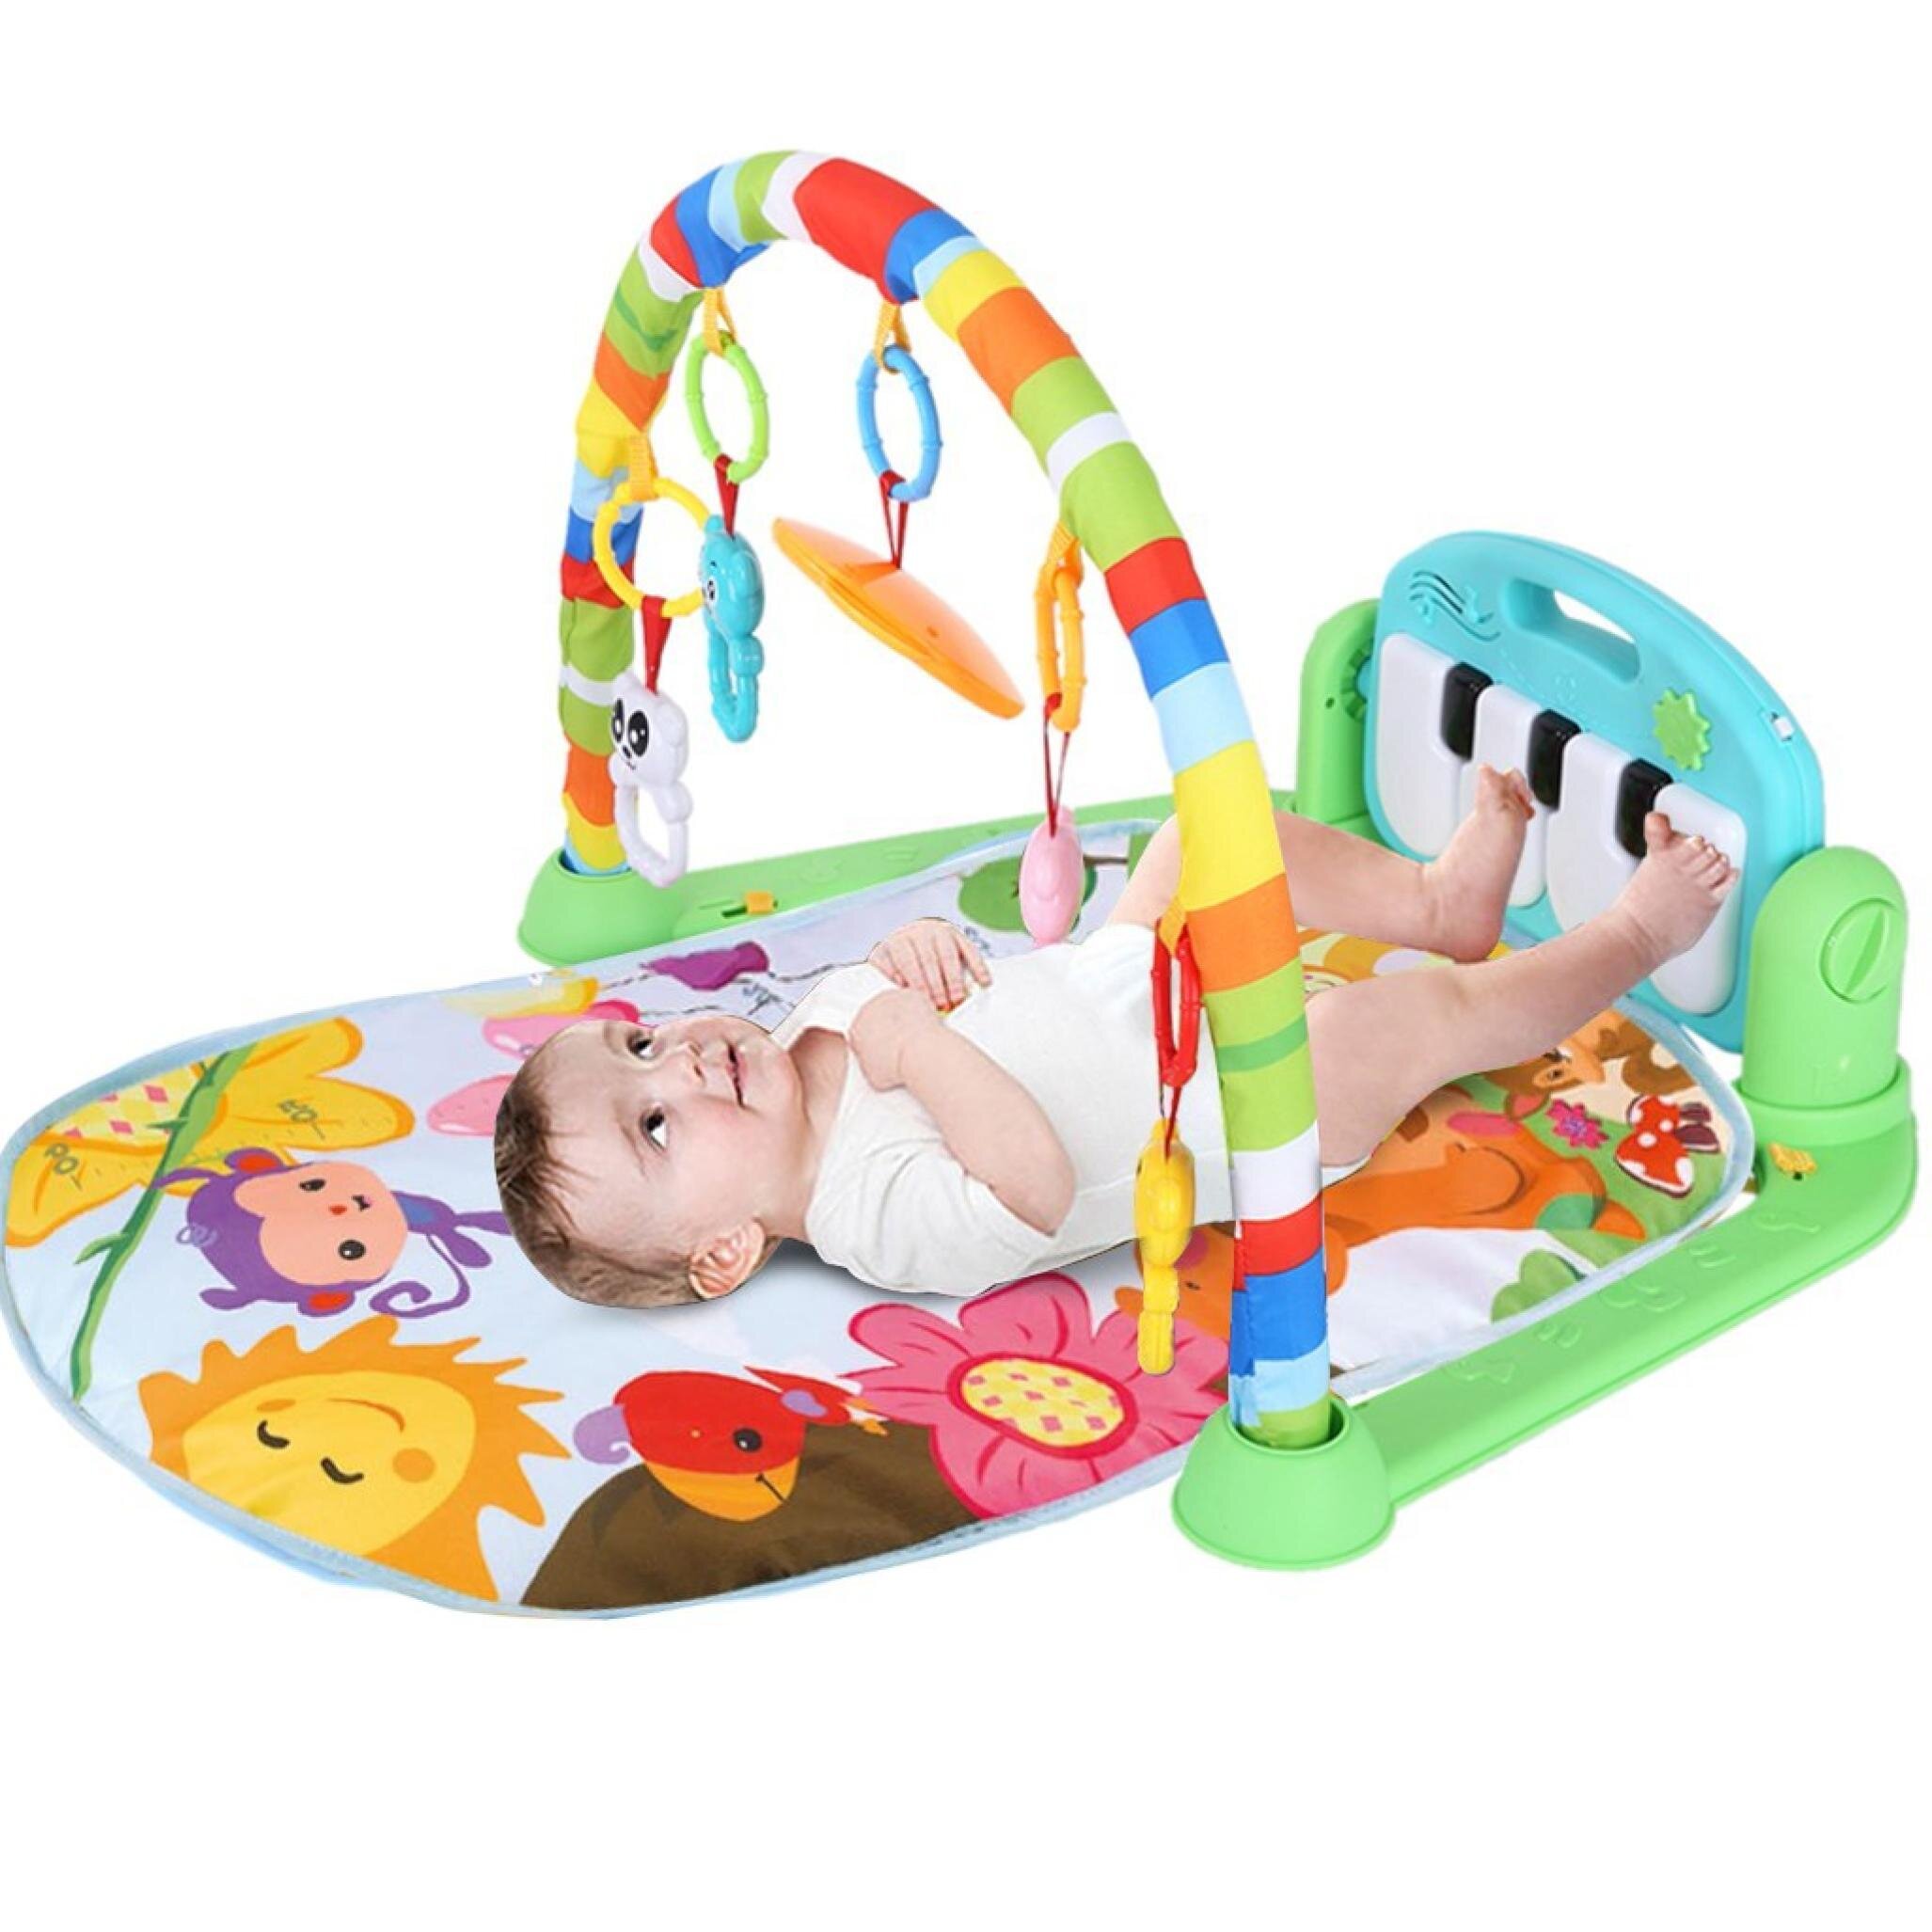 4-in-1 Baby Gym Floor Play Mat Musical Activity Center Kick And Play Piano Toy 